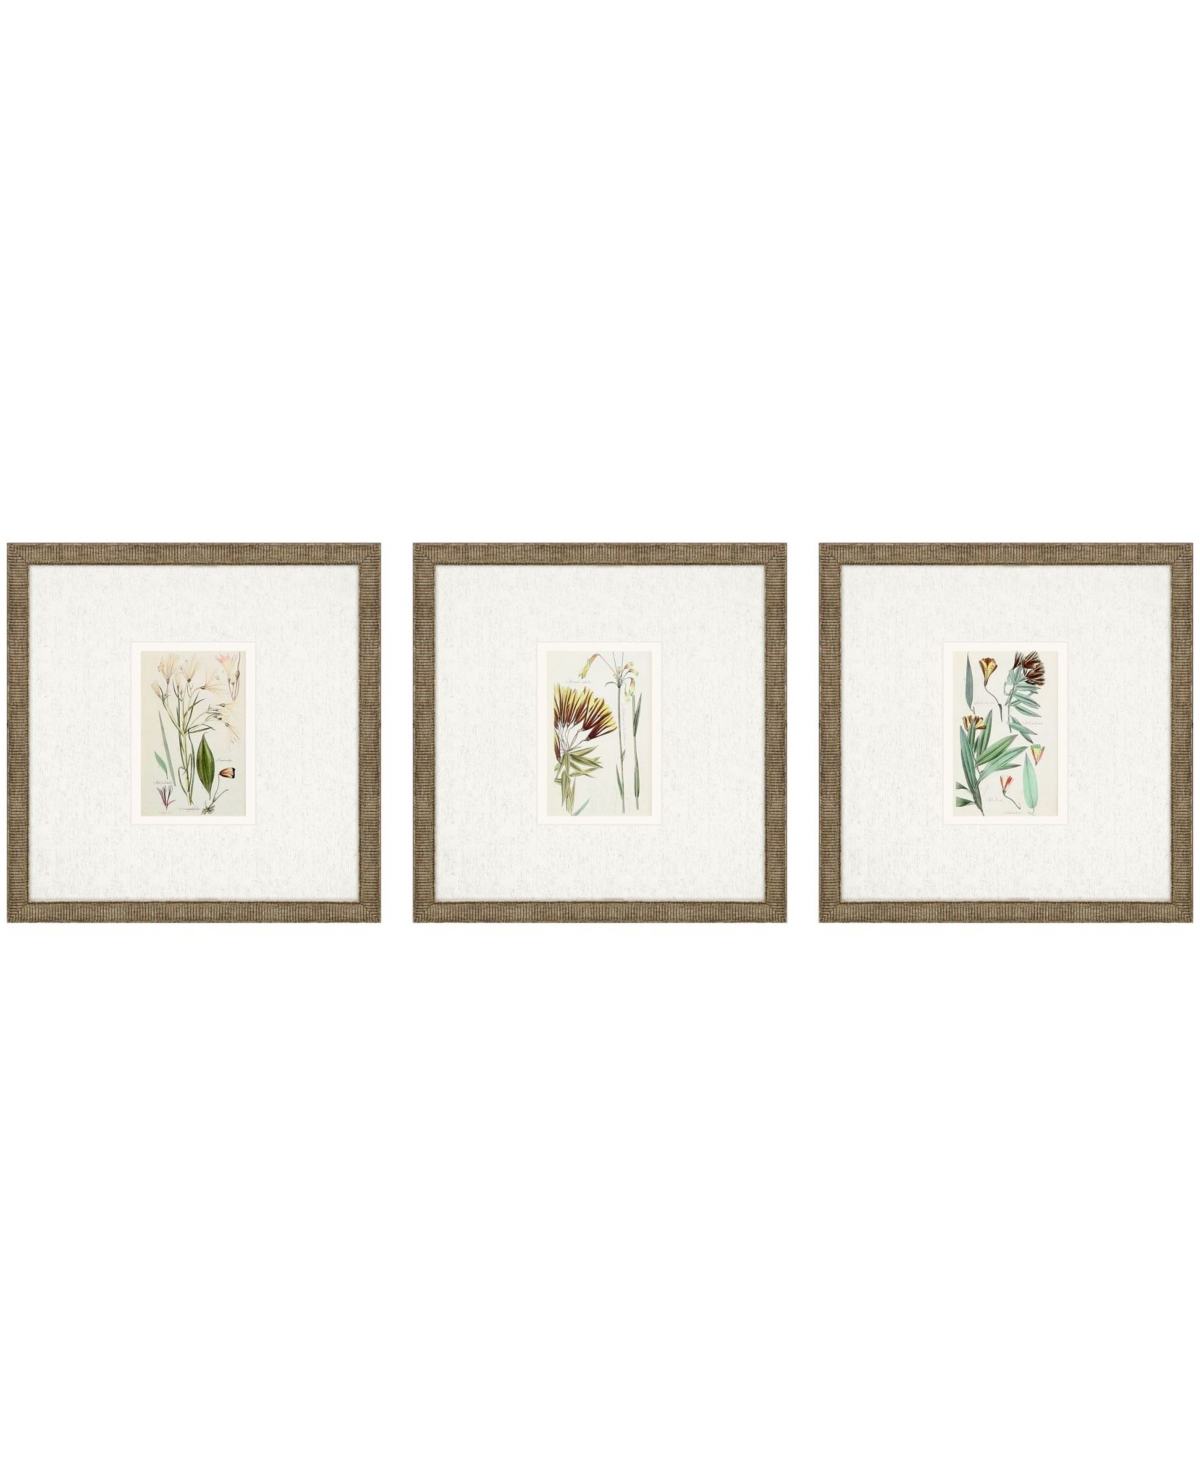 Paragon Picture Gallery Antique-like Botanical I Framed Art, Set Of 3 In Green